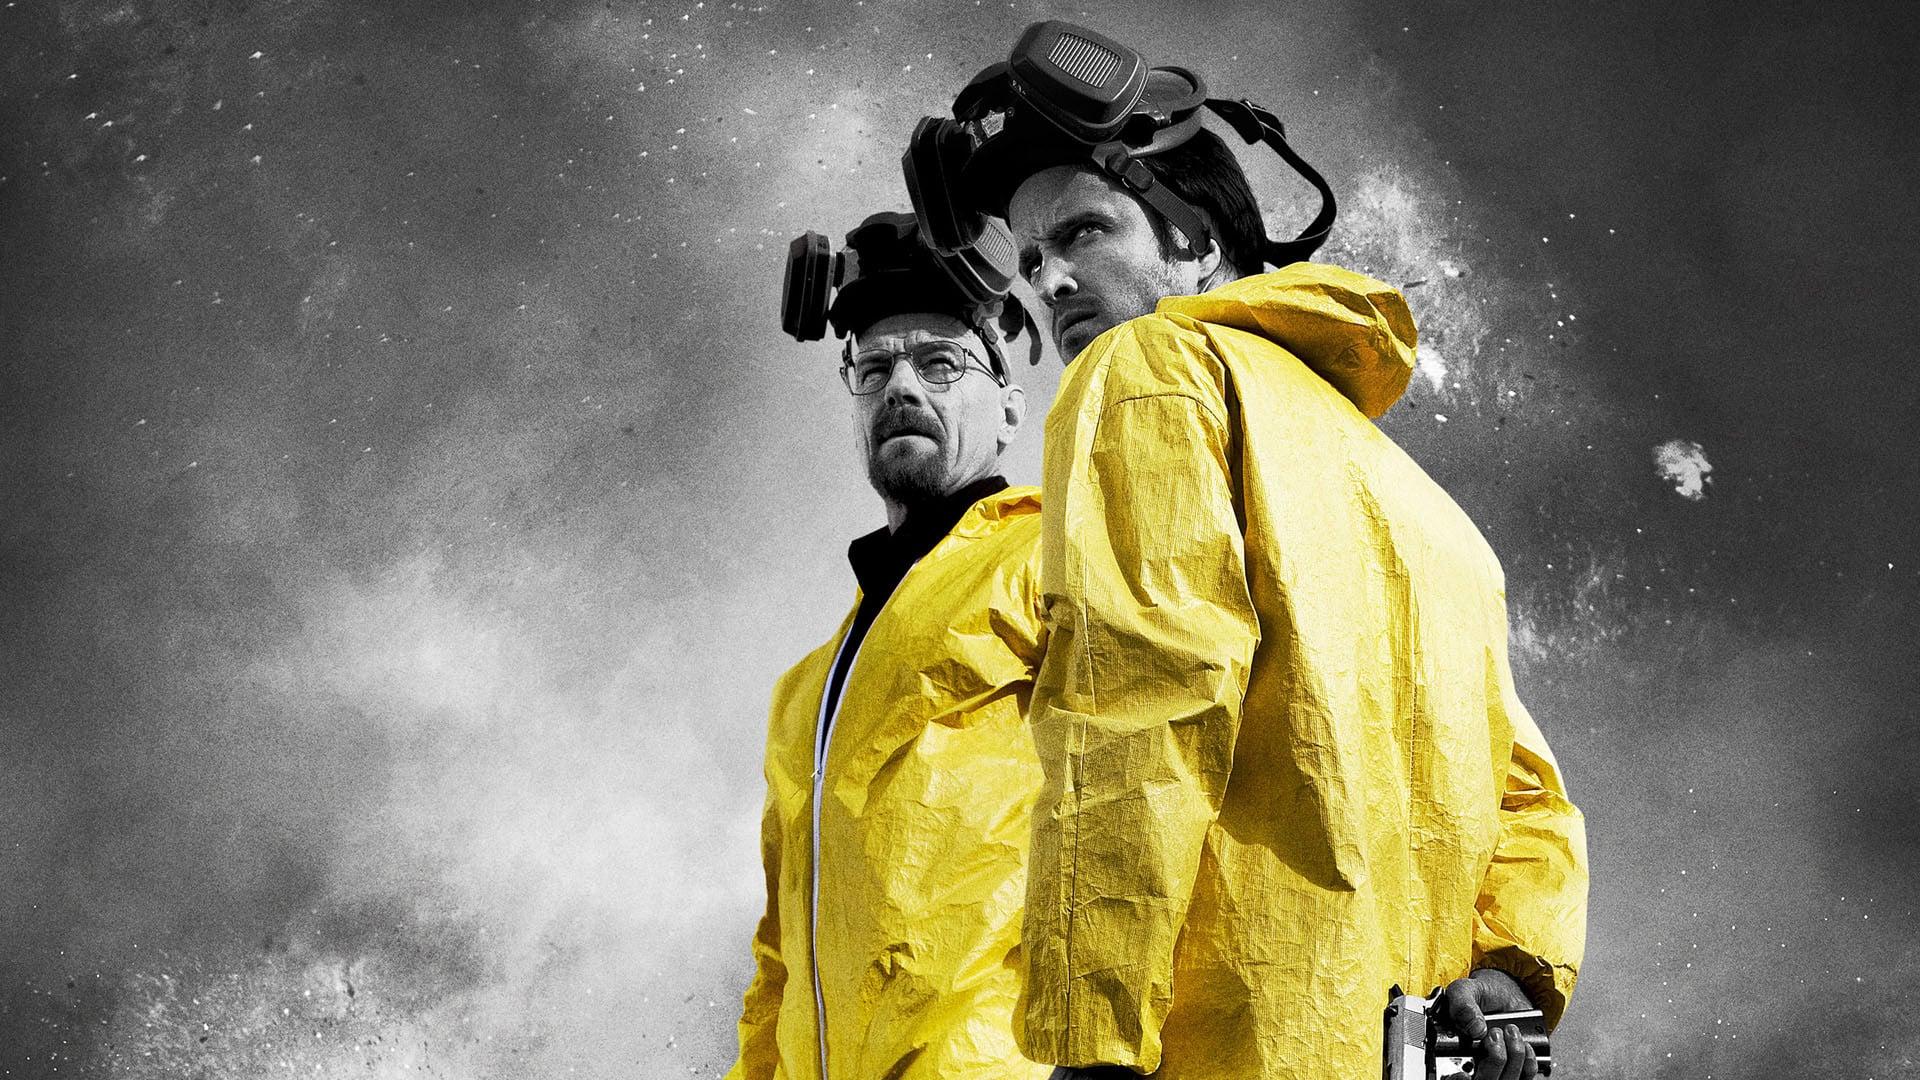 Backdrop Image for Breaking Bad